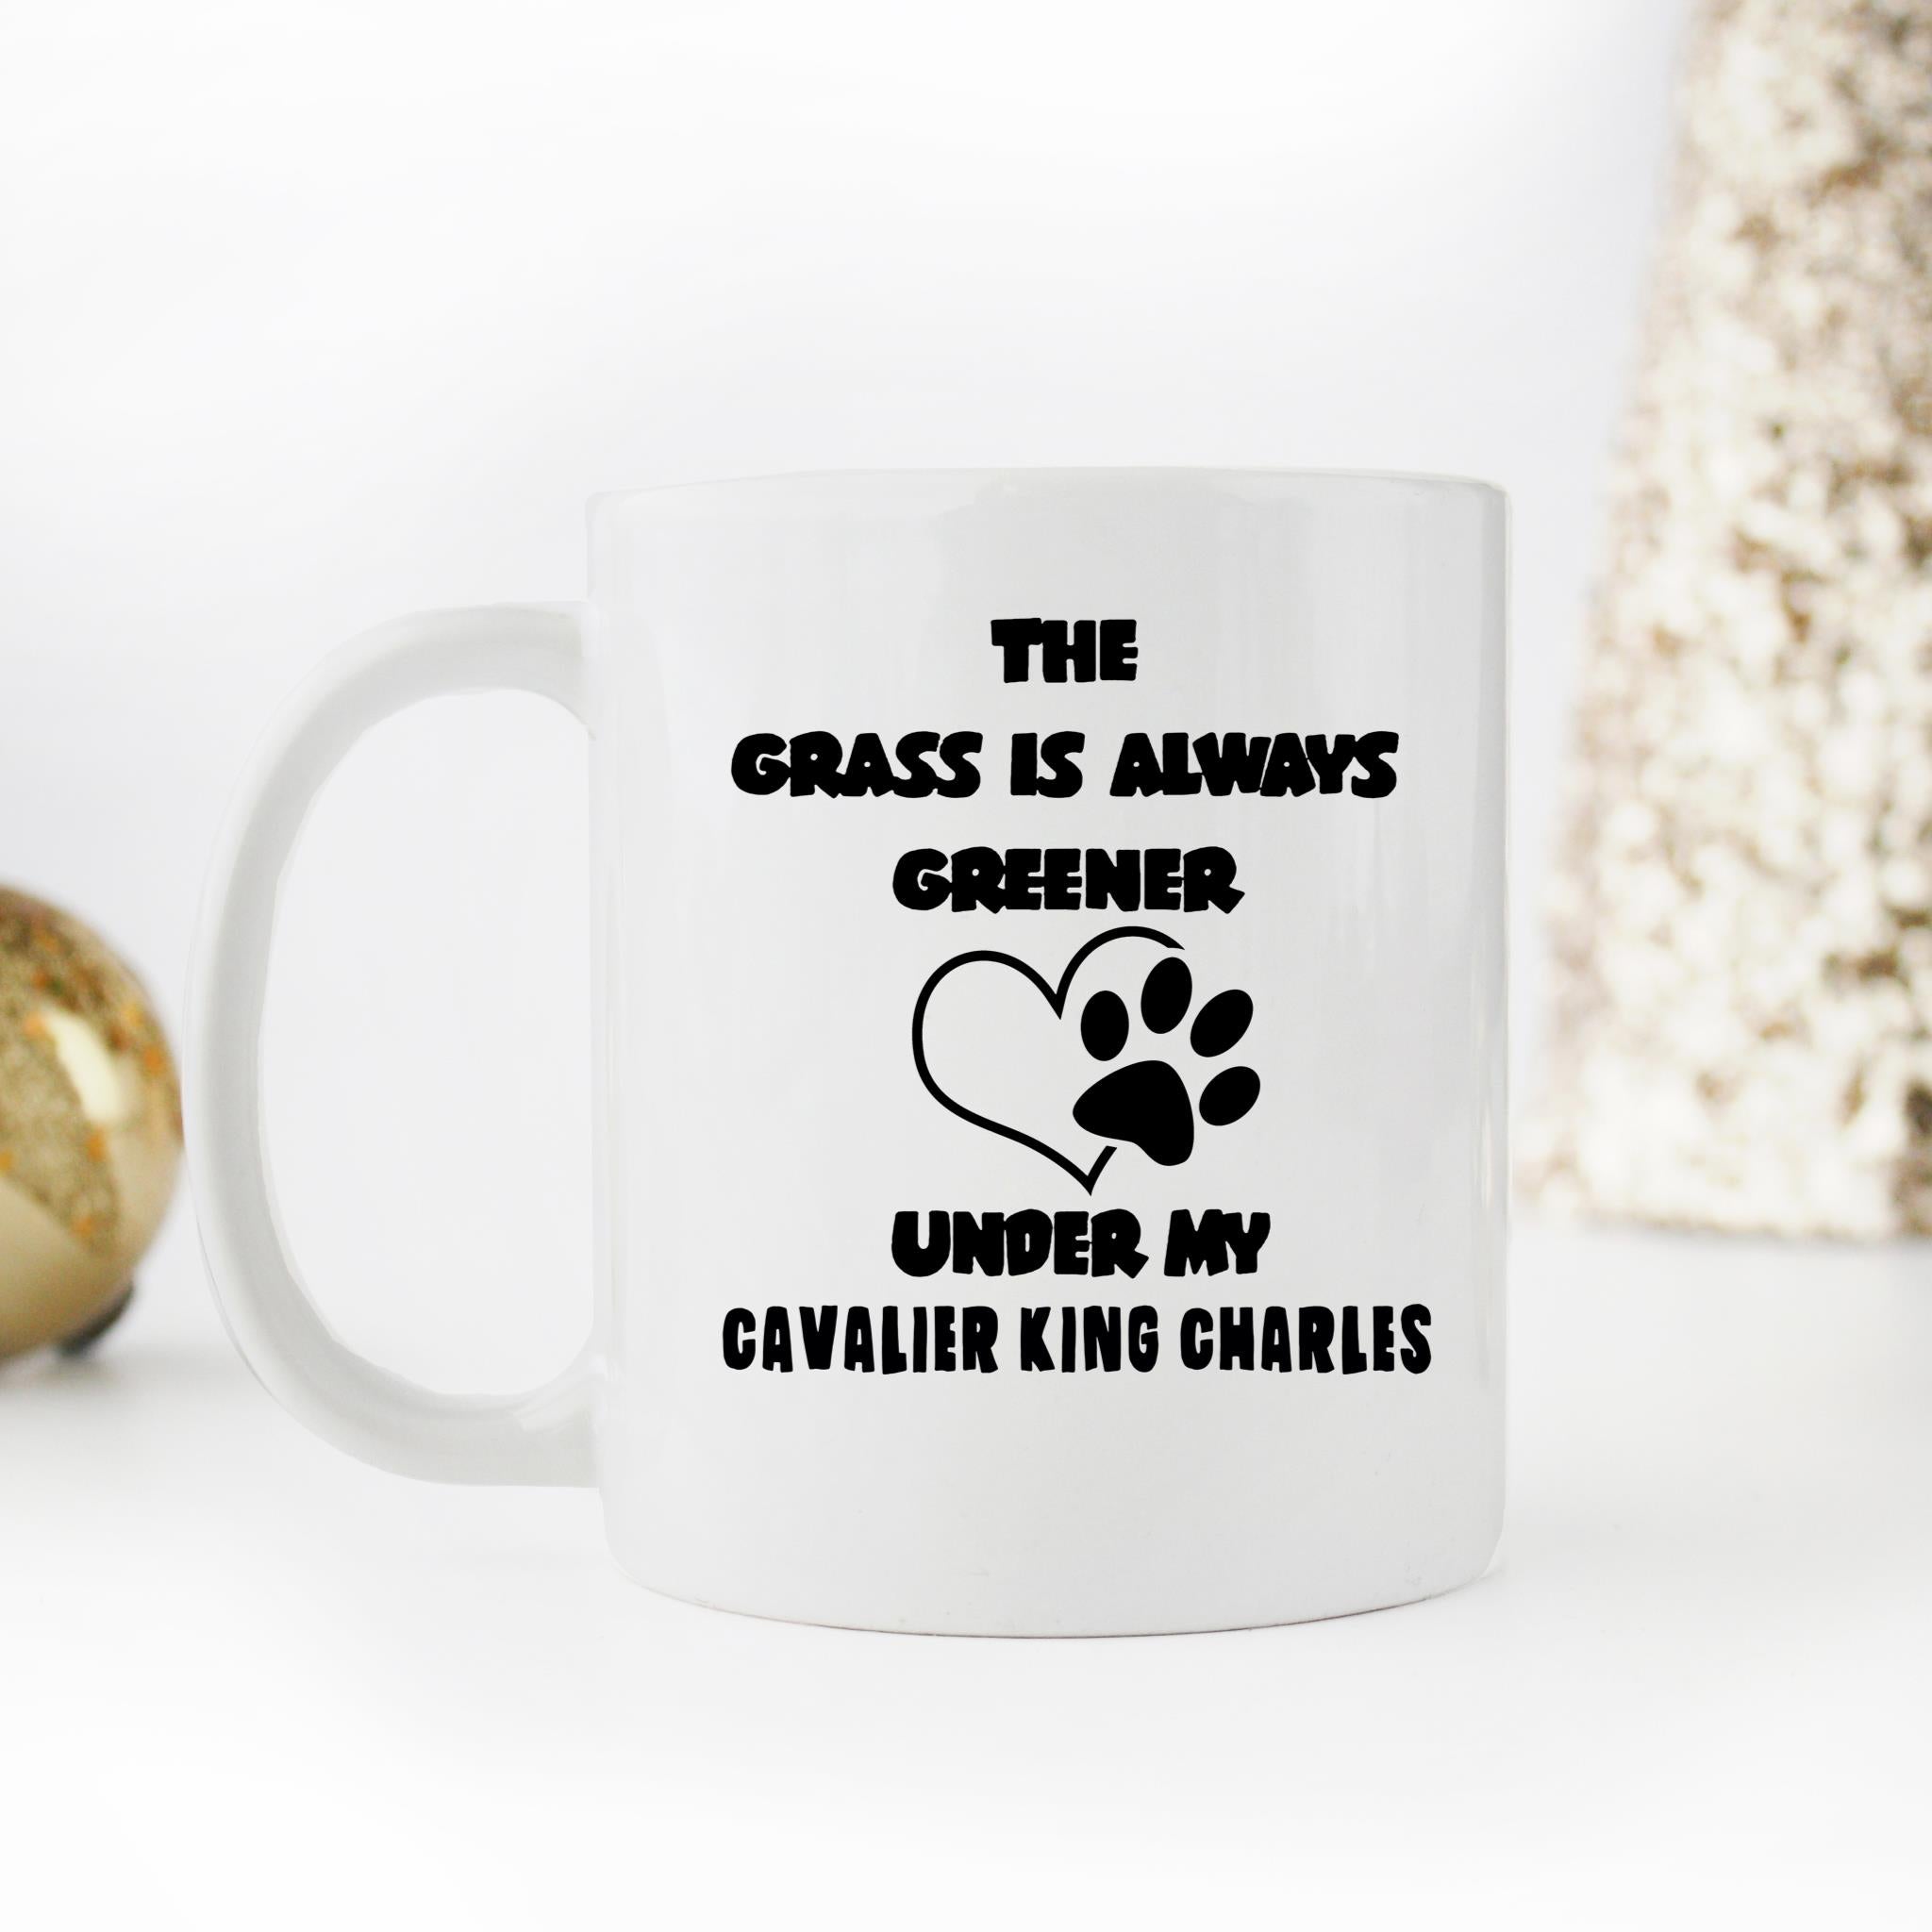 Skitons Funny Ceramic Novelty Coffee Mug The Grass Is Always Greener Under My Cavalier King Charles Dog Funny Sarcastic, Dog Lover itsWk4q